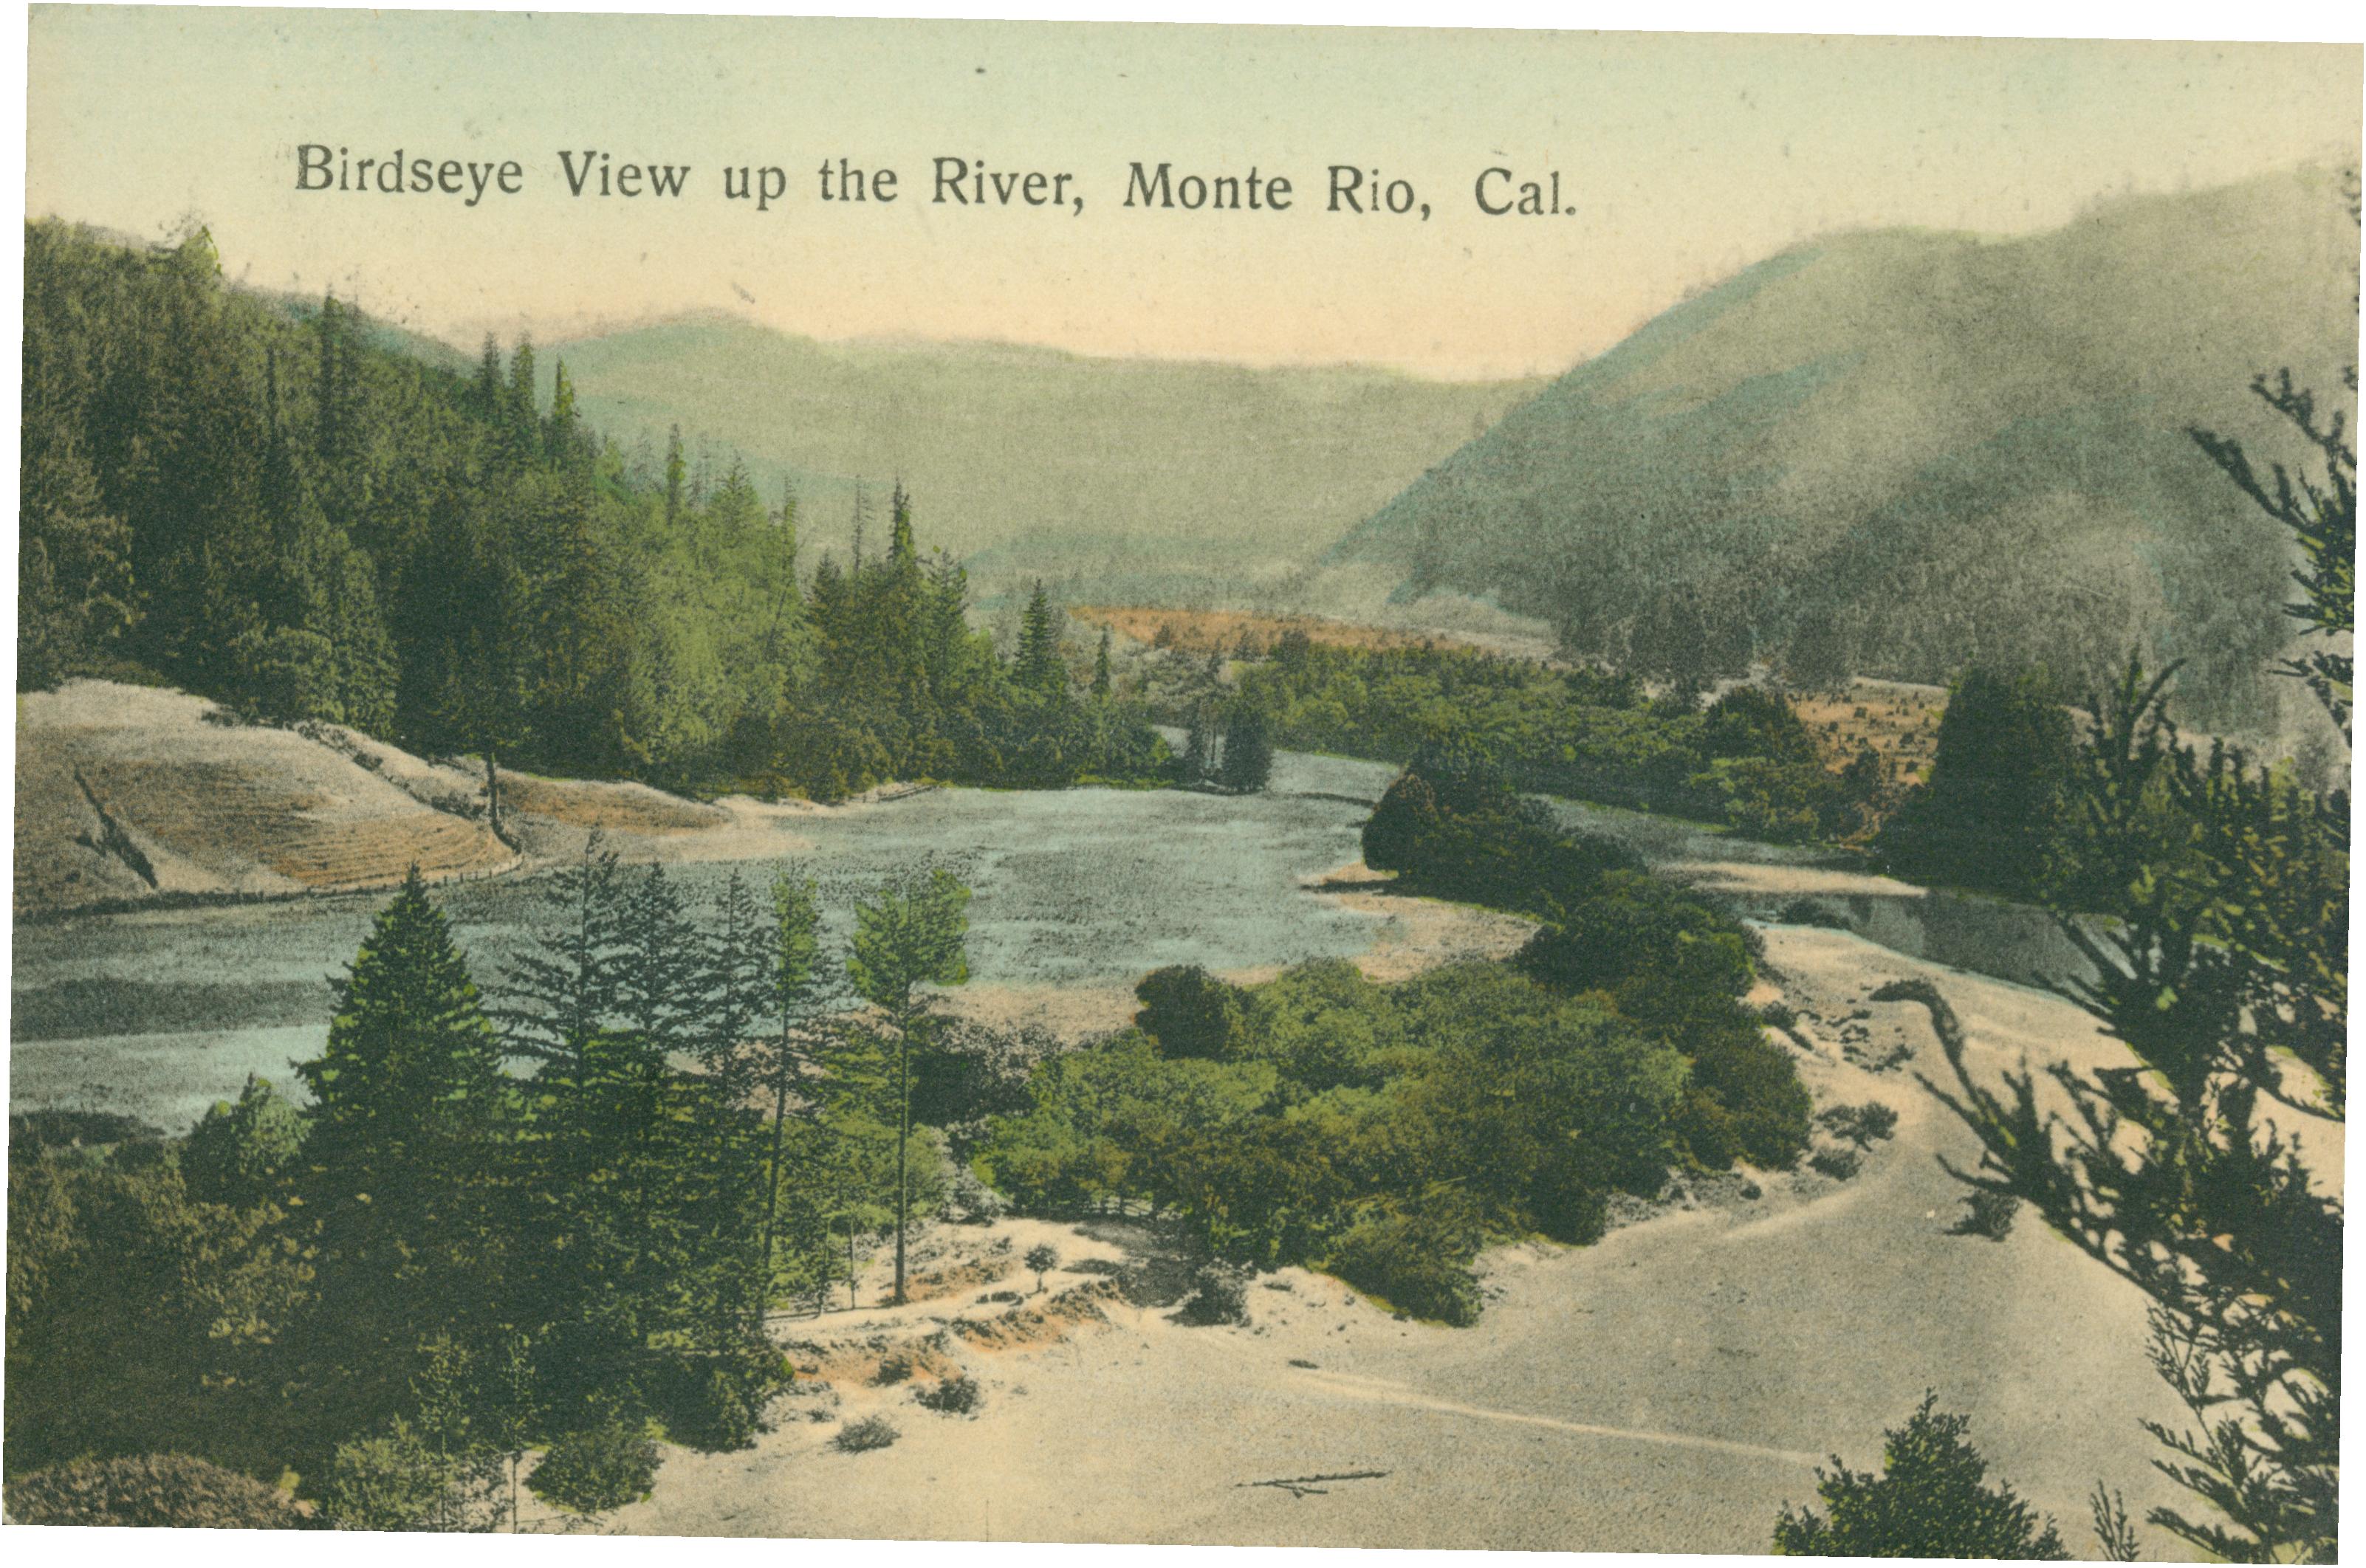 Shows the Russian River in Monte Rio, with several sandy beaches